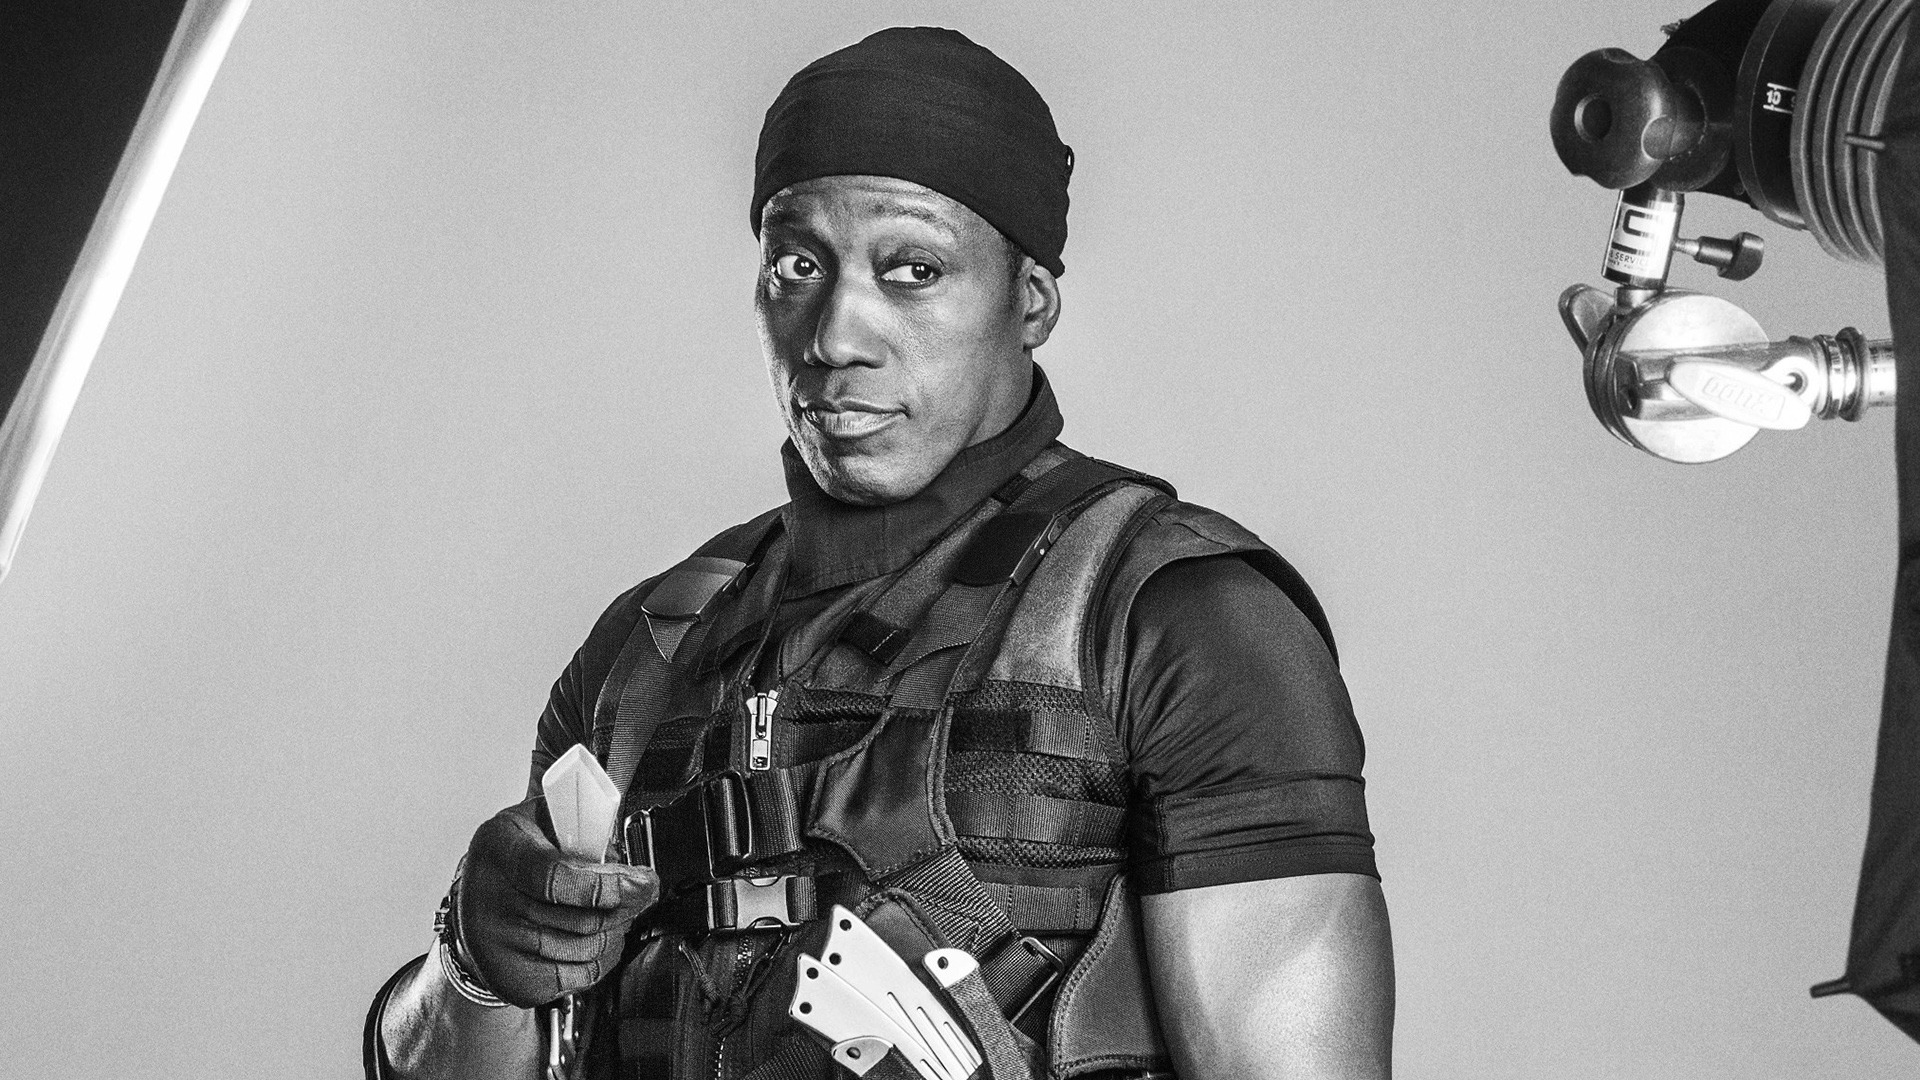 Wesley Snipes The Expendables 3 for 1920 x 1080 HDTV 1080p resolution